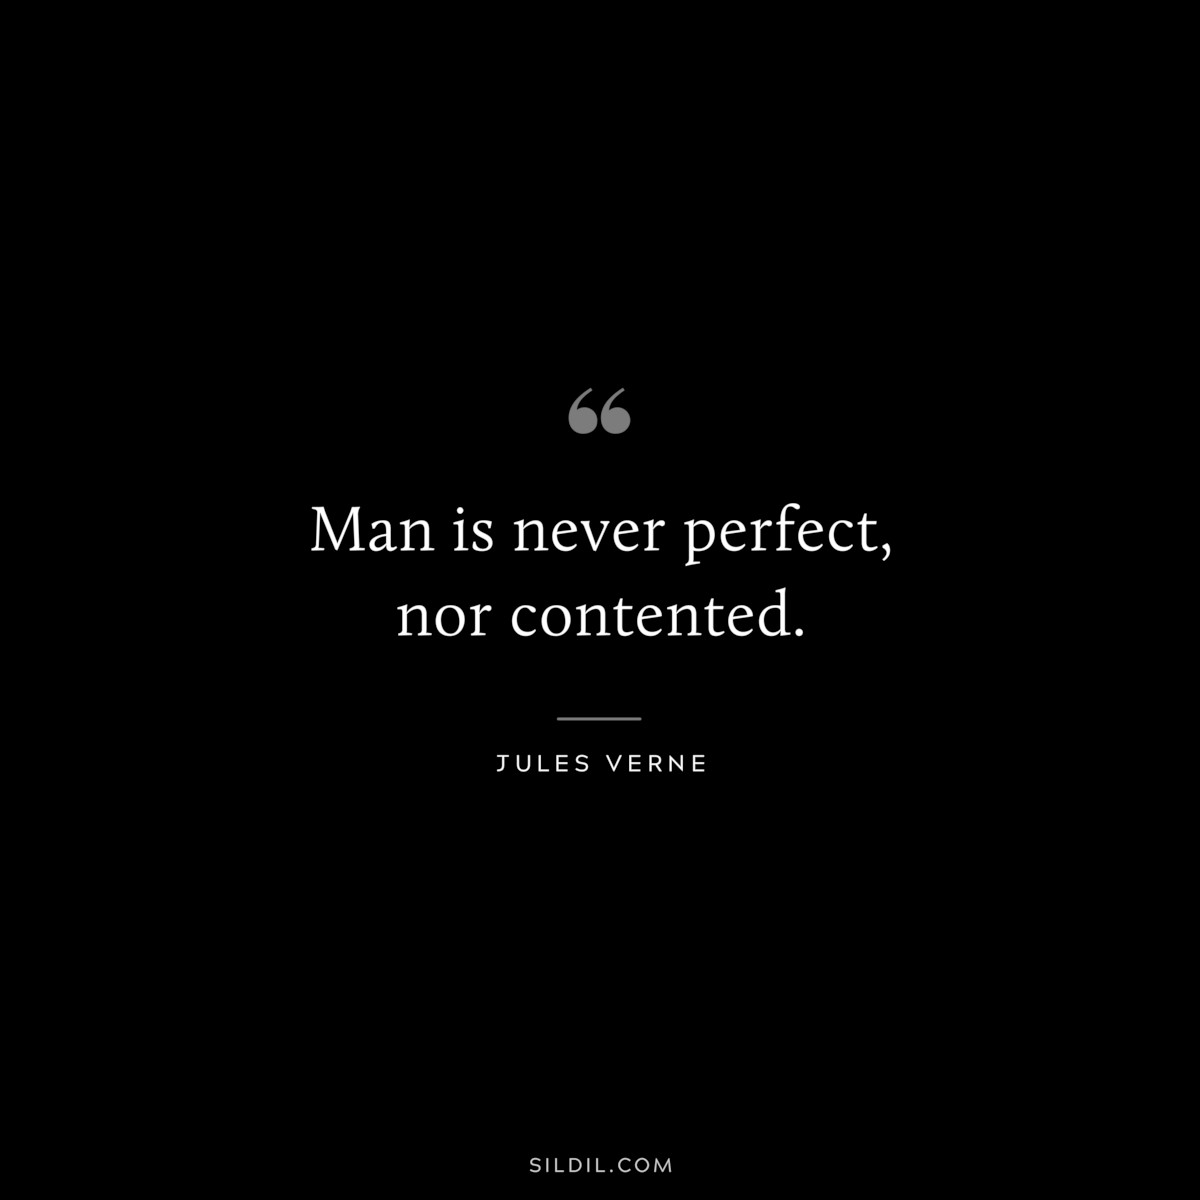 Man is never perfect, nor contented.